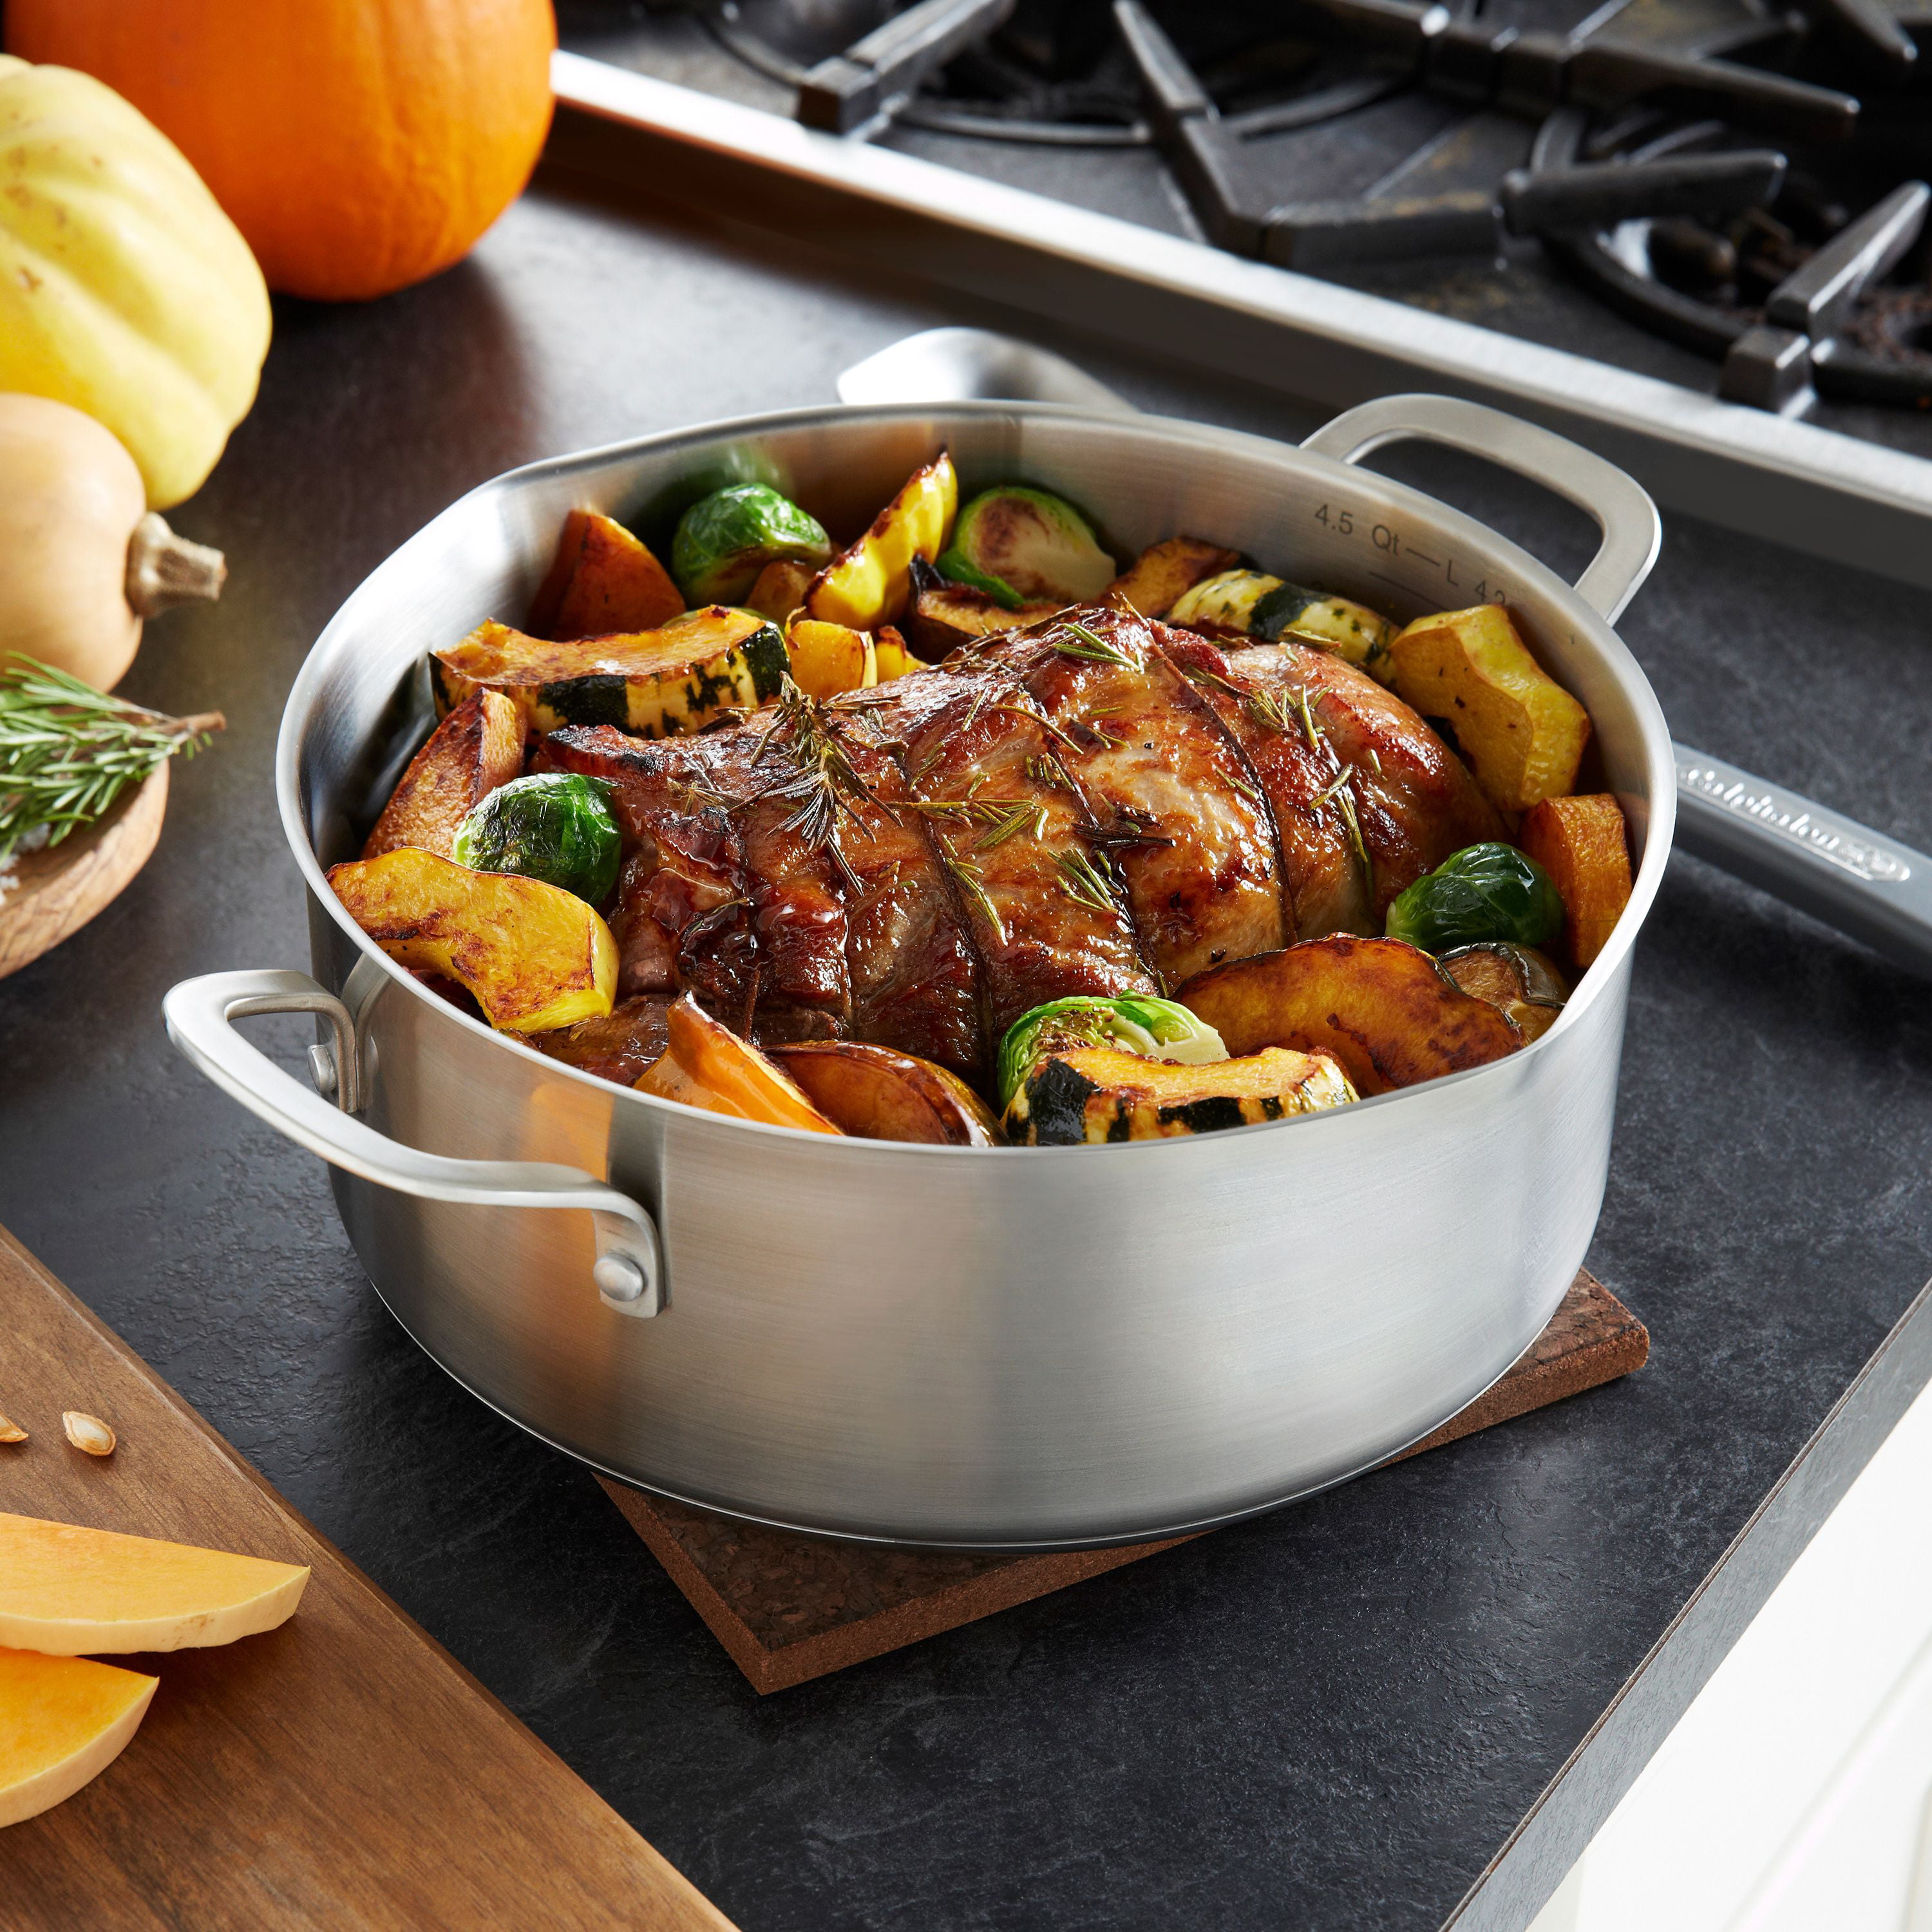 Calphalon Signature Stainless Steel 5 Qt. Dutch Oven with Cover - Macy's